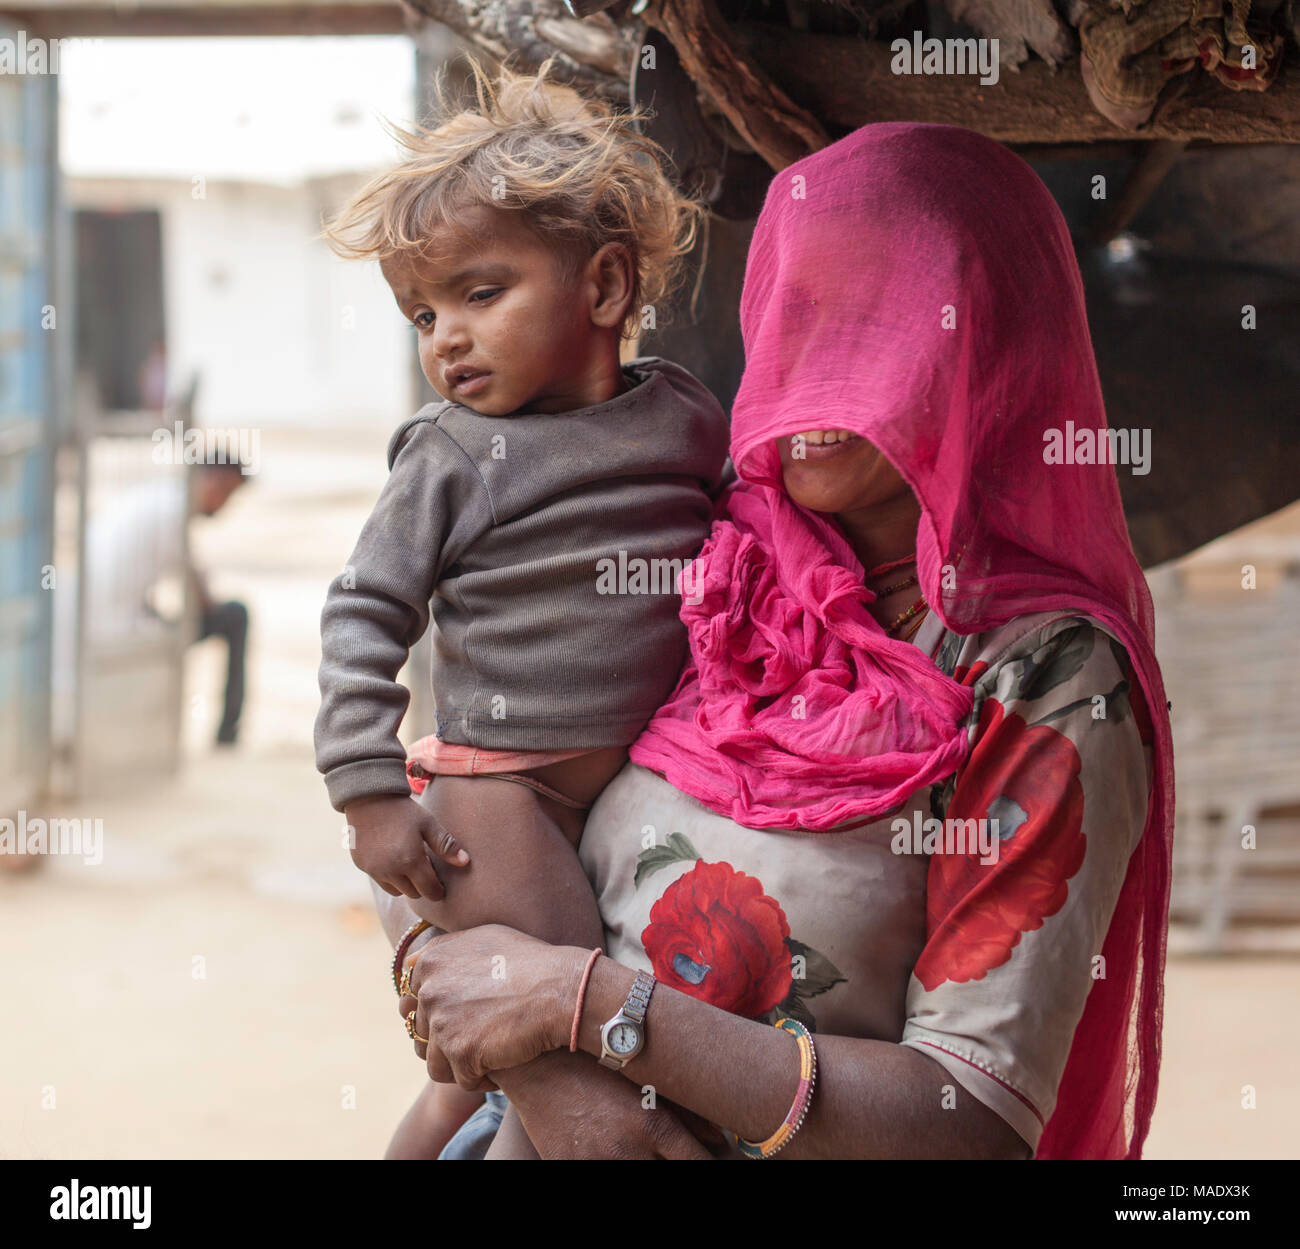 Woman with her head covered by a pink scarf holds a young child in a traditional village near Shapura, Rajasthan, India. Stock Photo